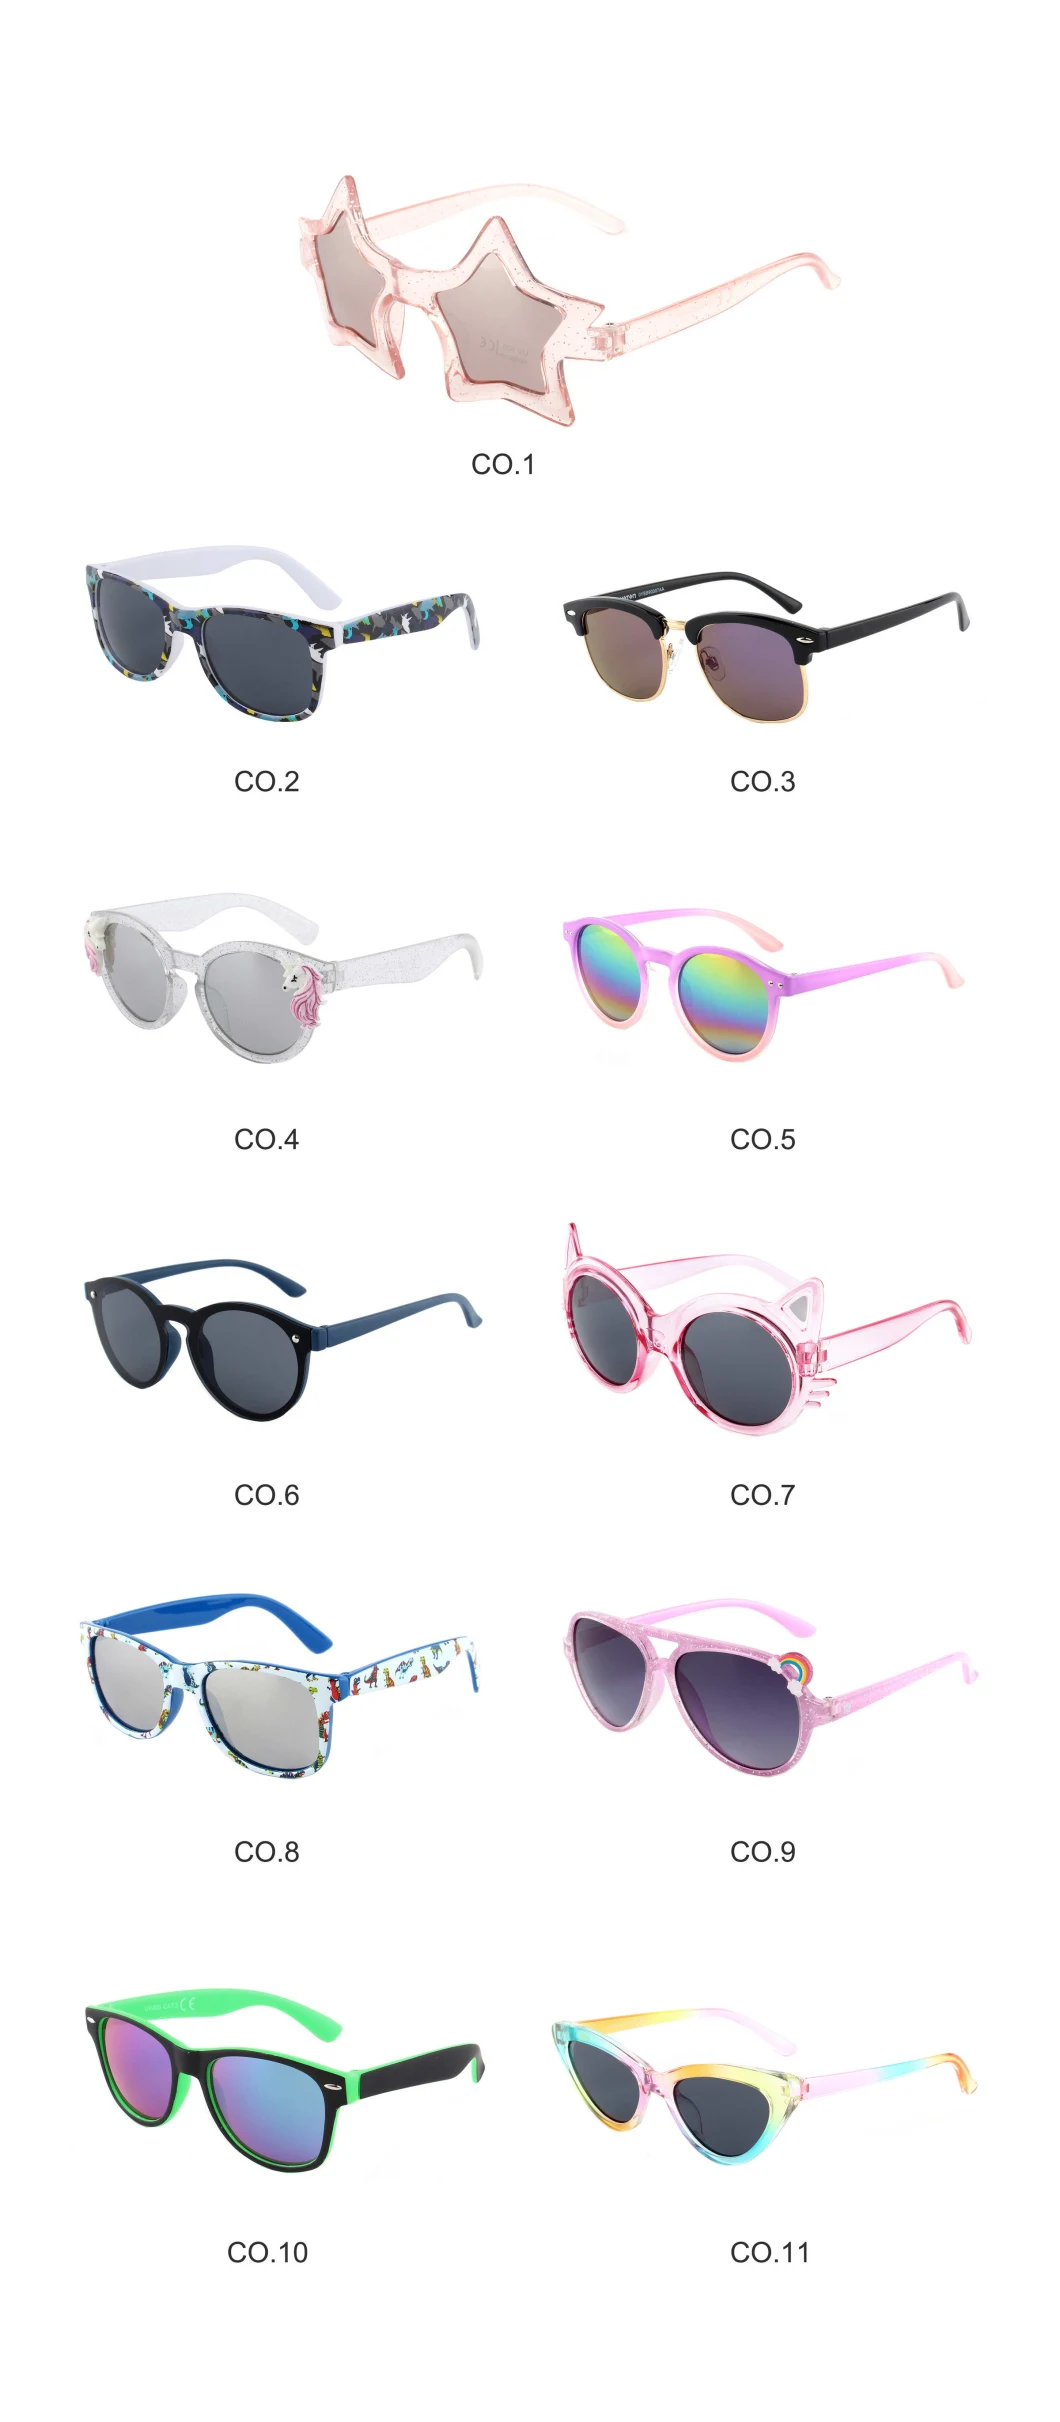 Big Promotion Huge Discount Ready Stock Sunglasses Outlets for Lady, Men and Kids